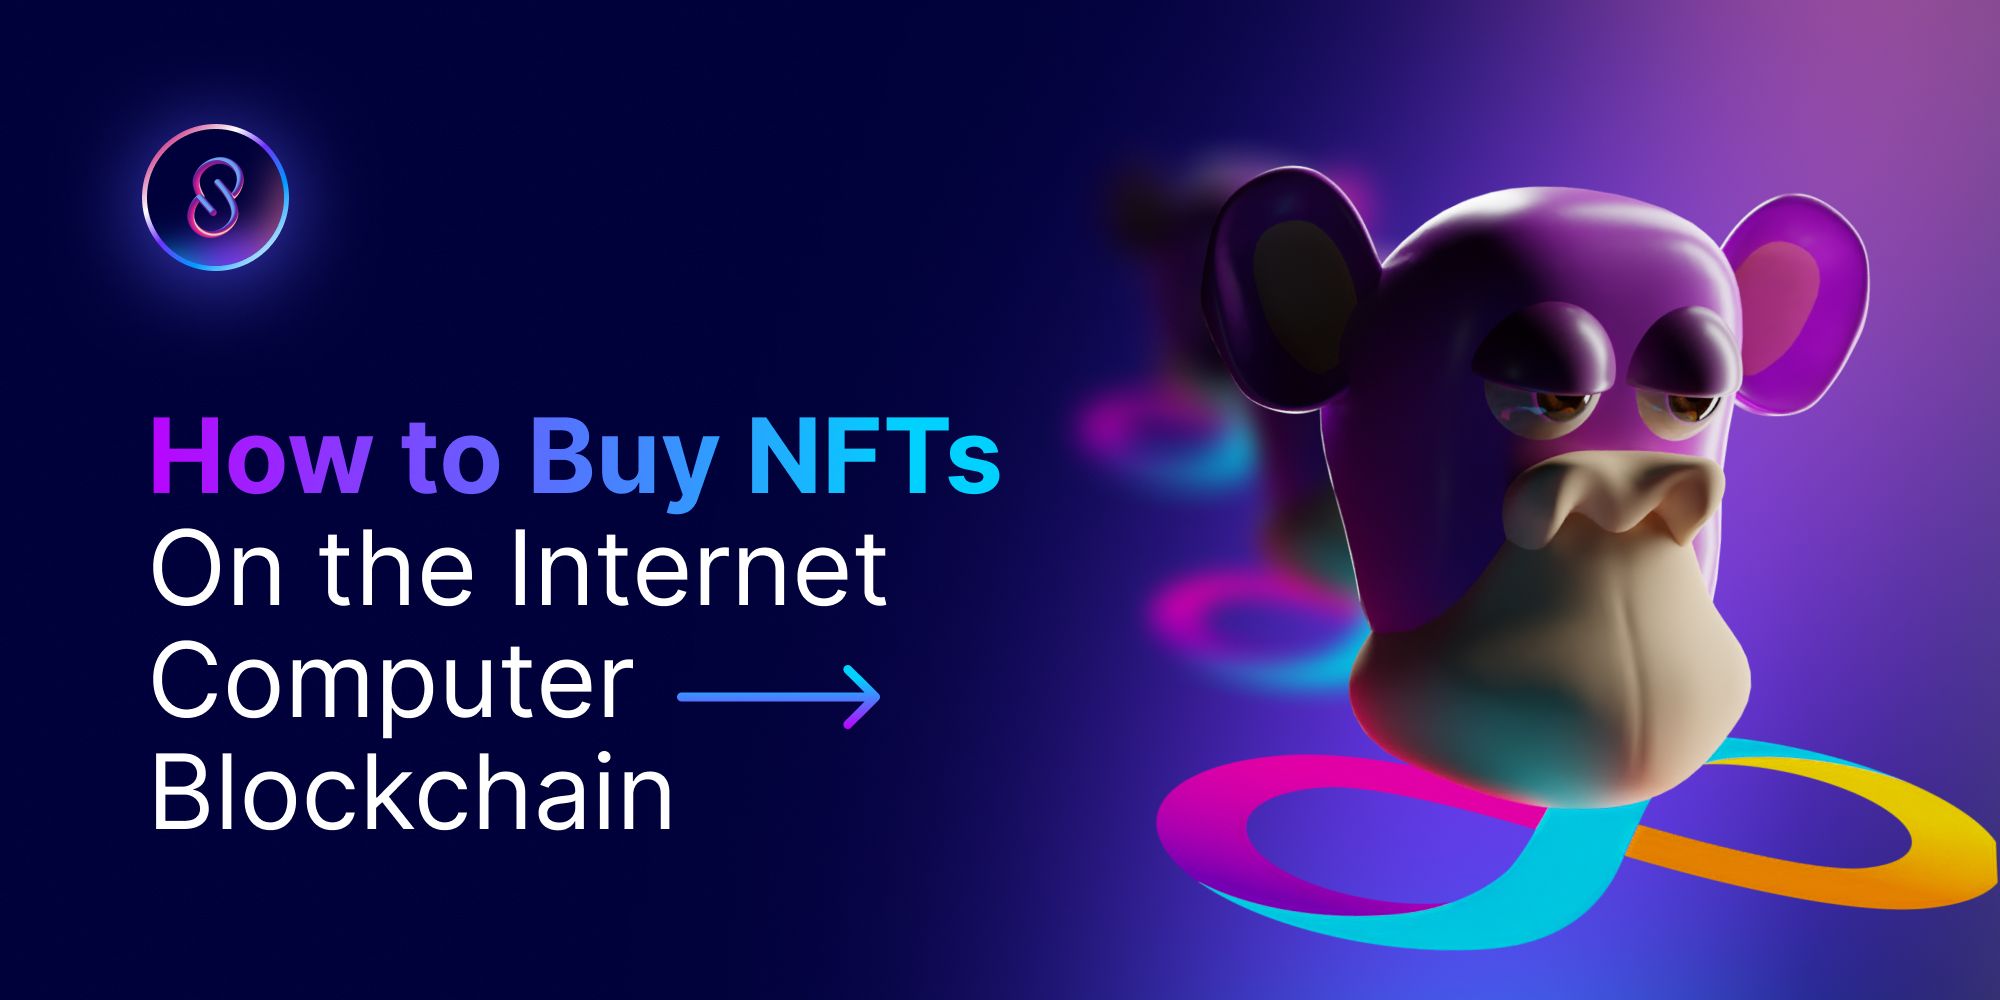 How to Buy NFTs on the Internet Computer Blockchain